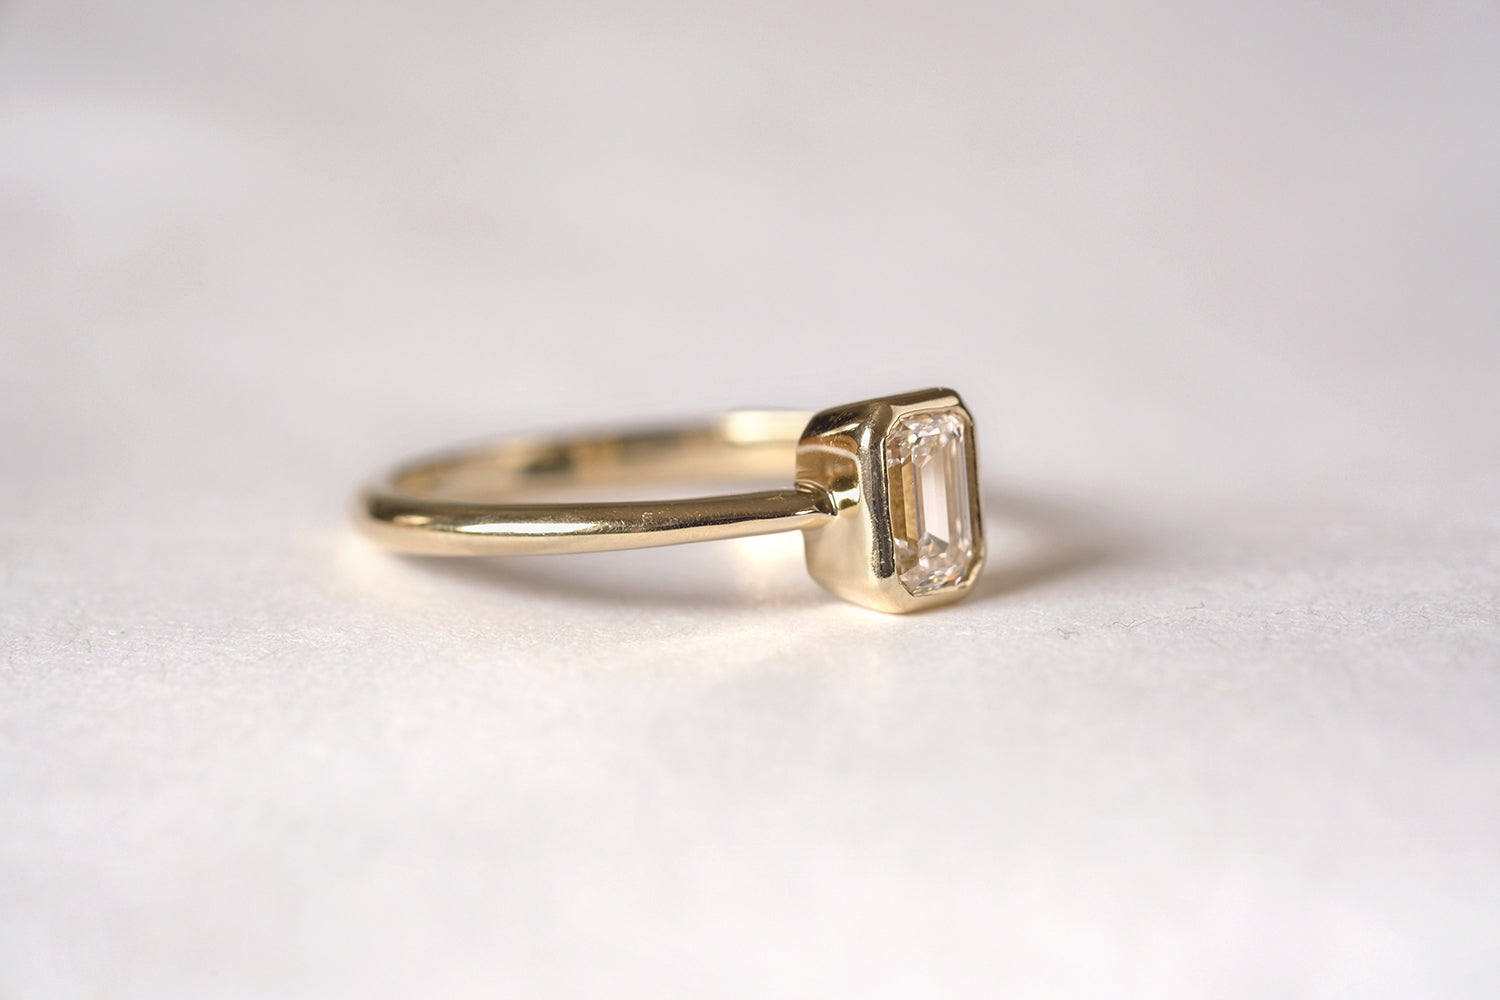 Engagement Gold Ring Set With A Diamond - Emerald Cut